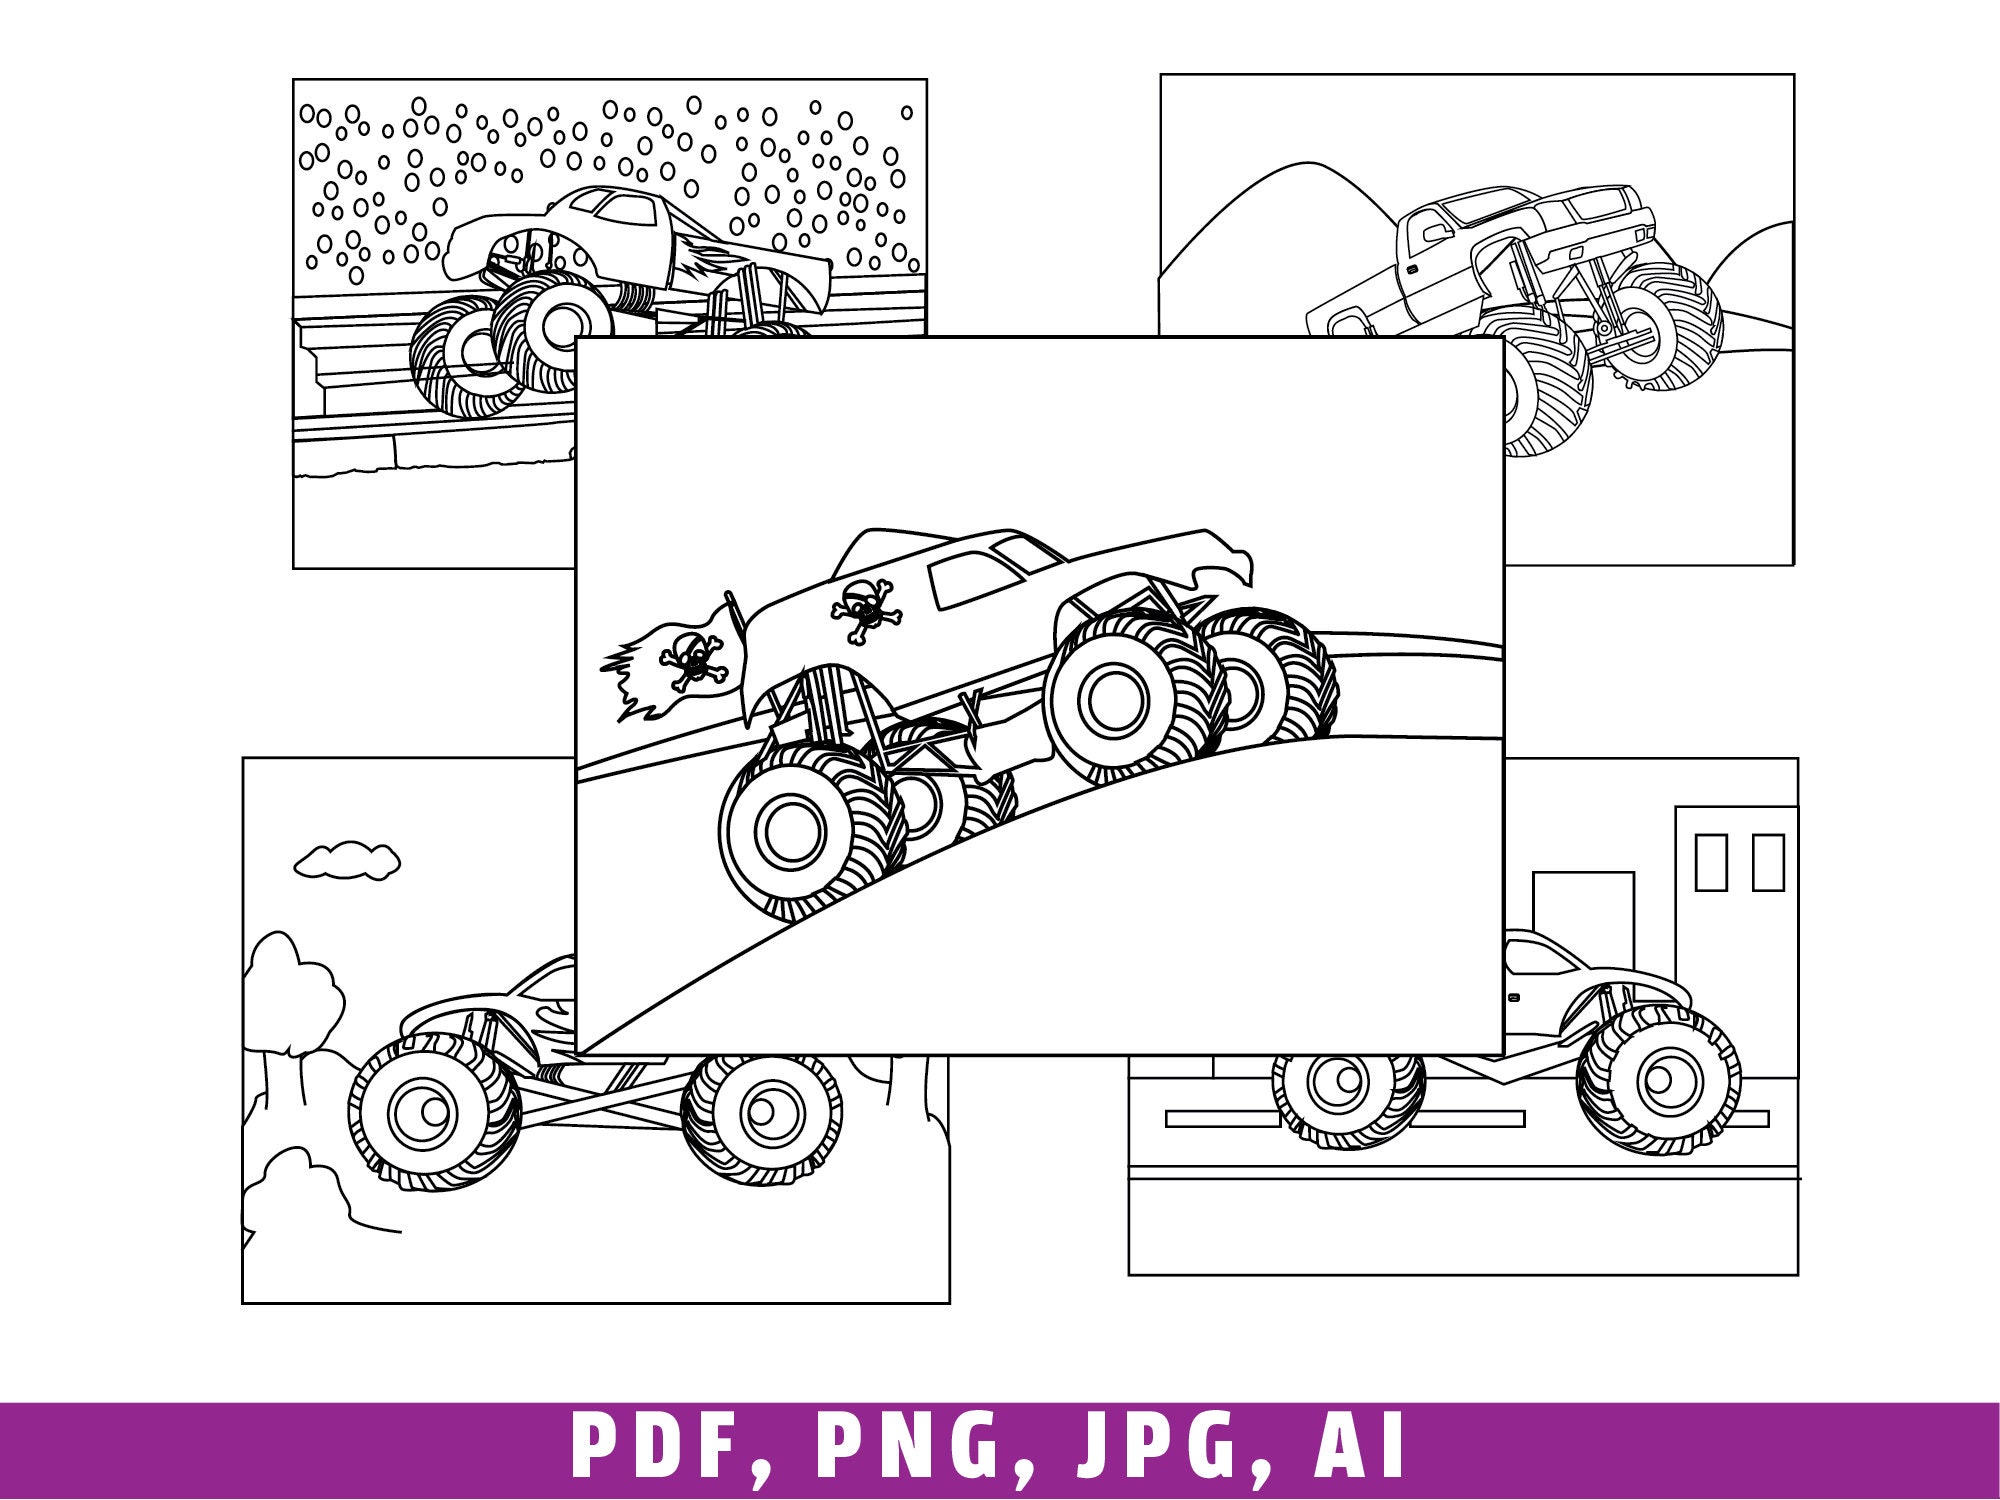 Bulldozer Monster Truck coloring page